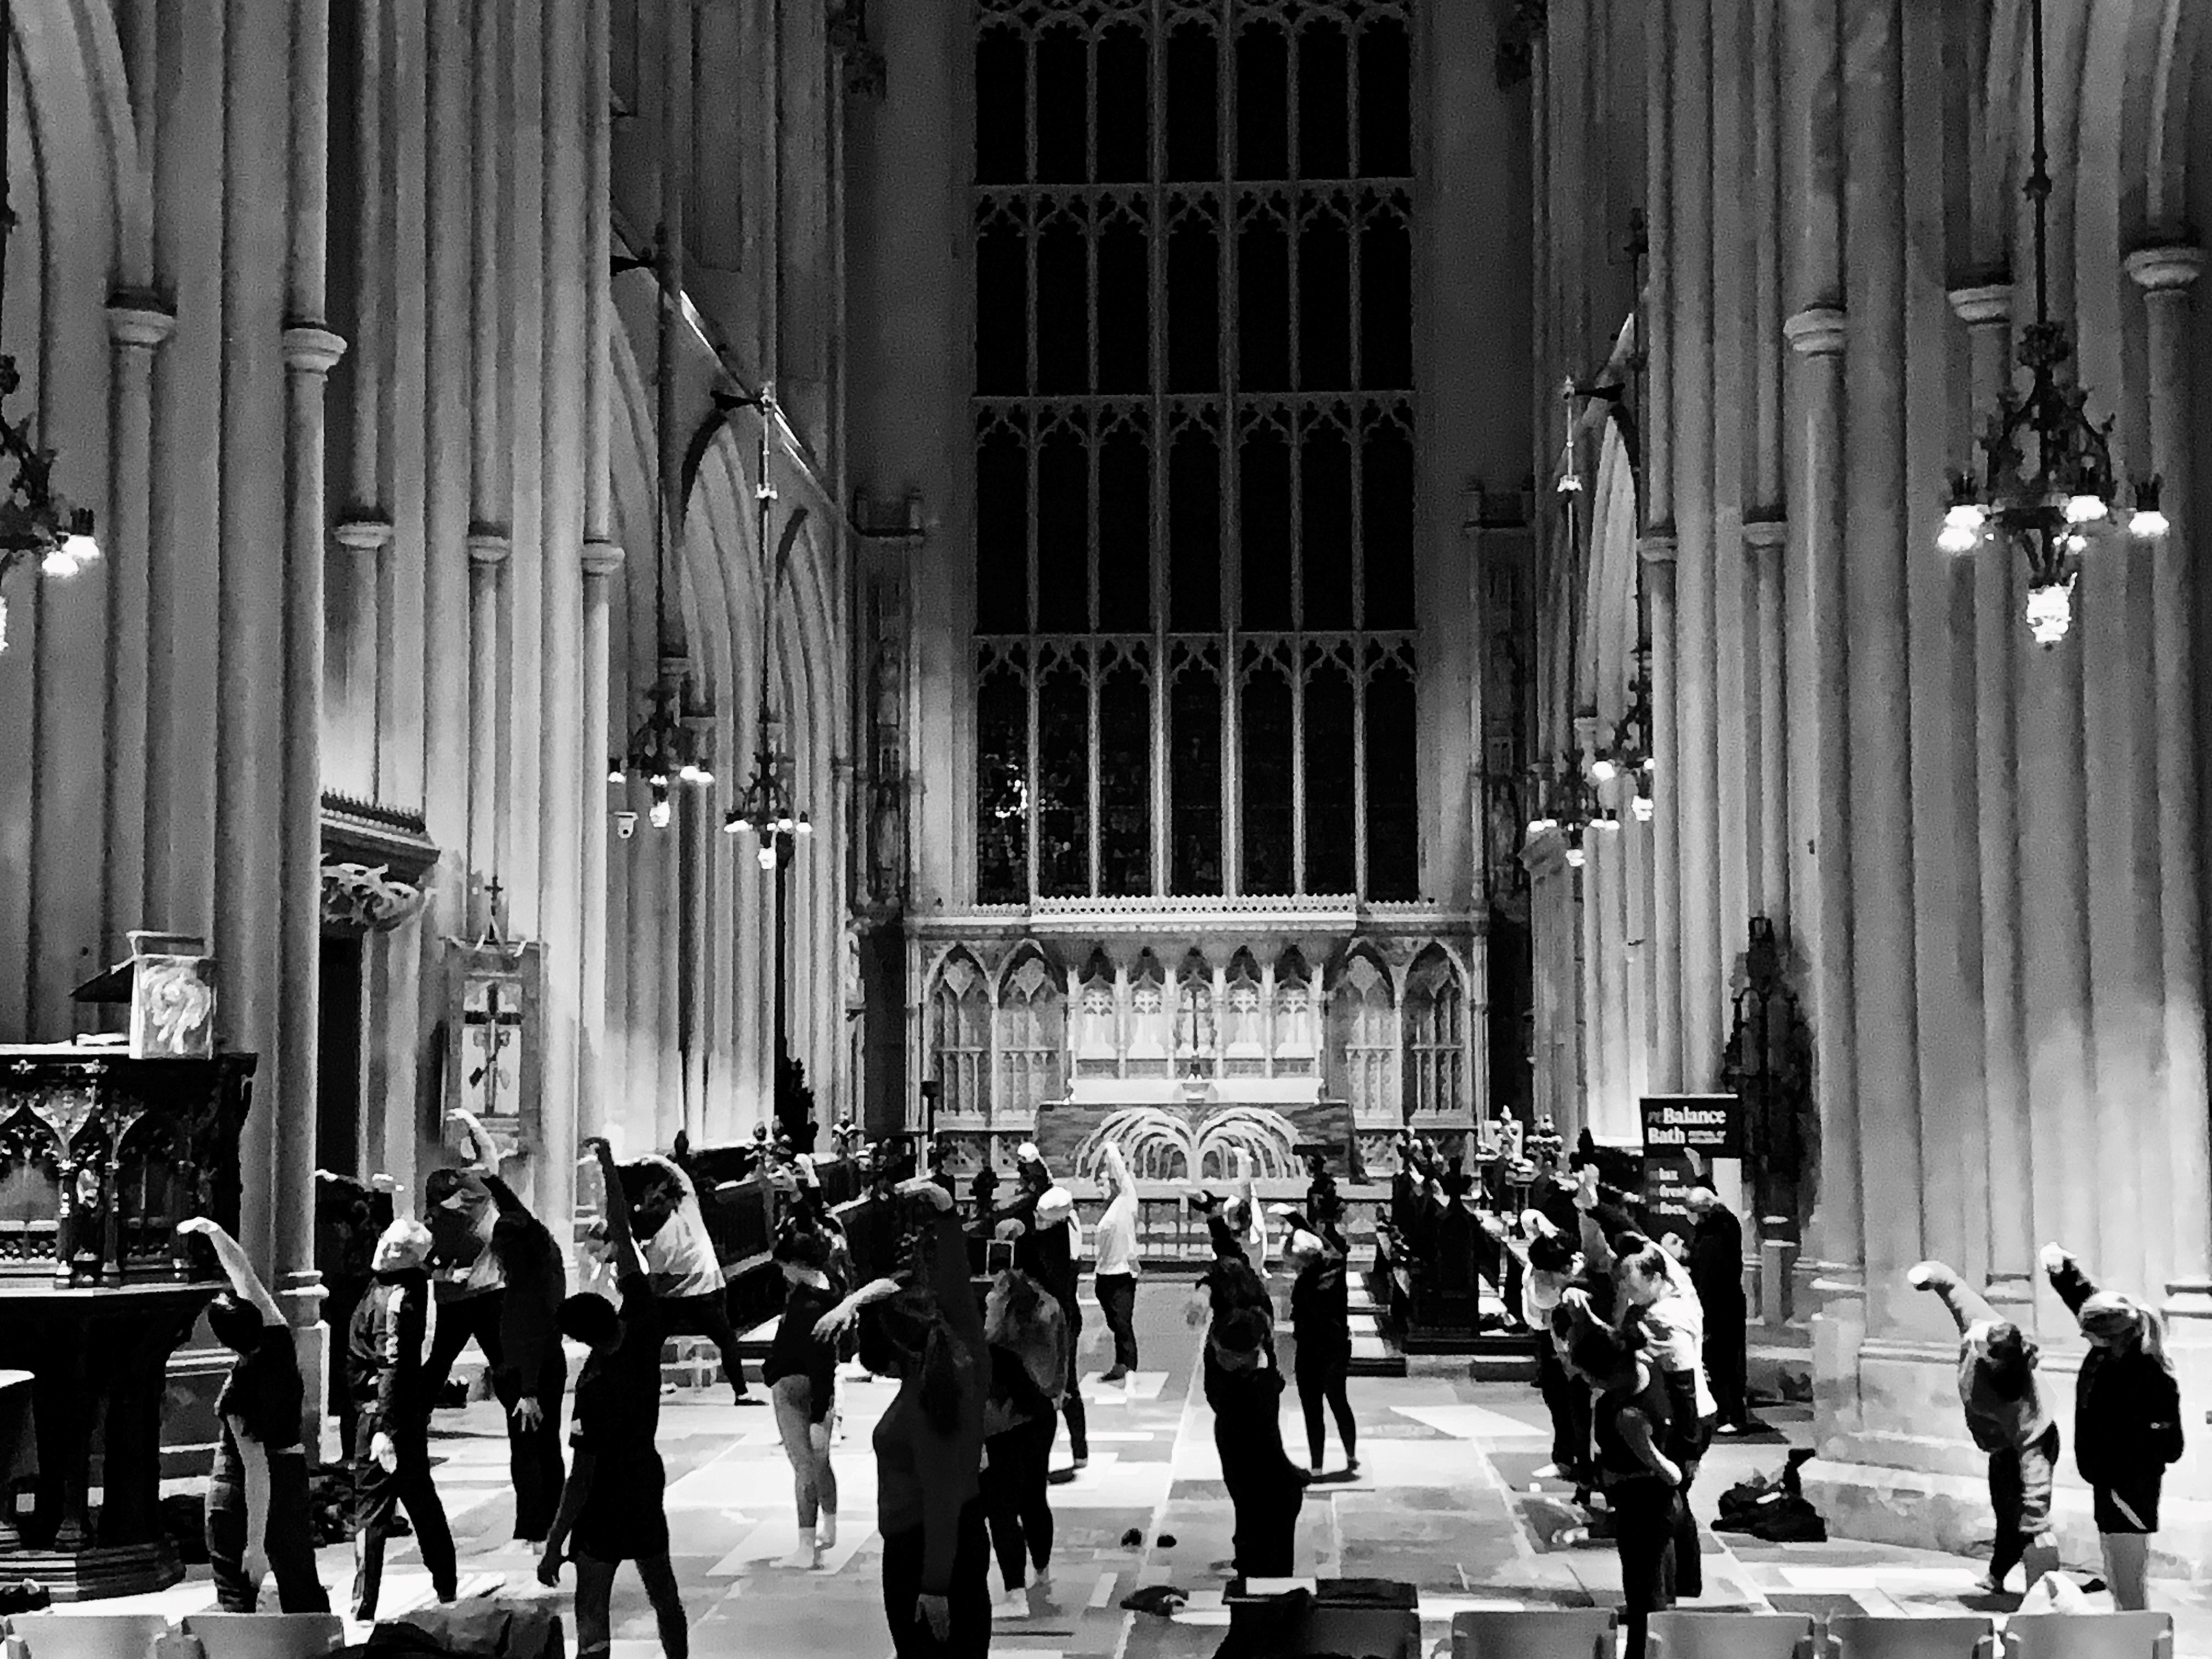 A group of people stretching in Bath Abbey